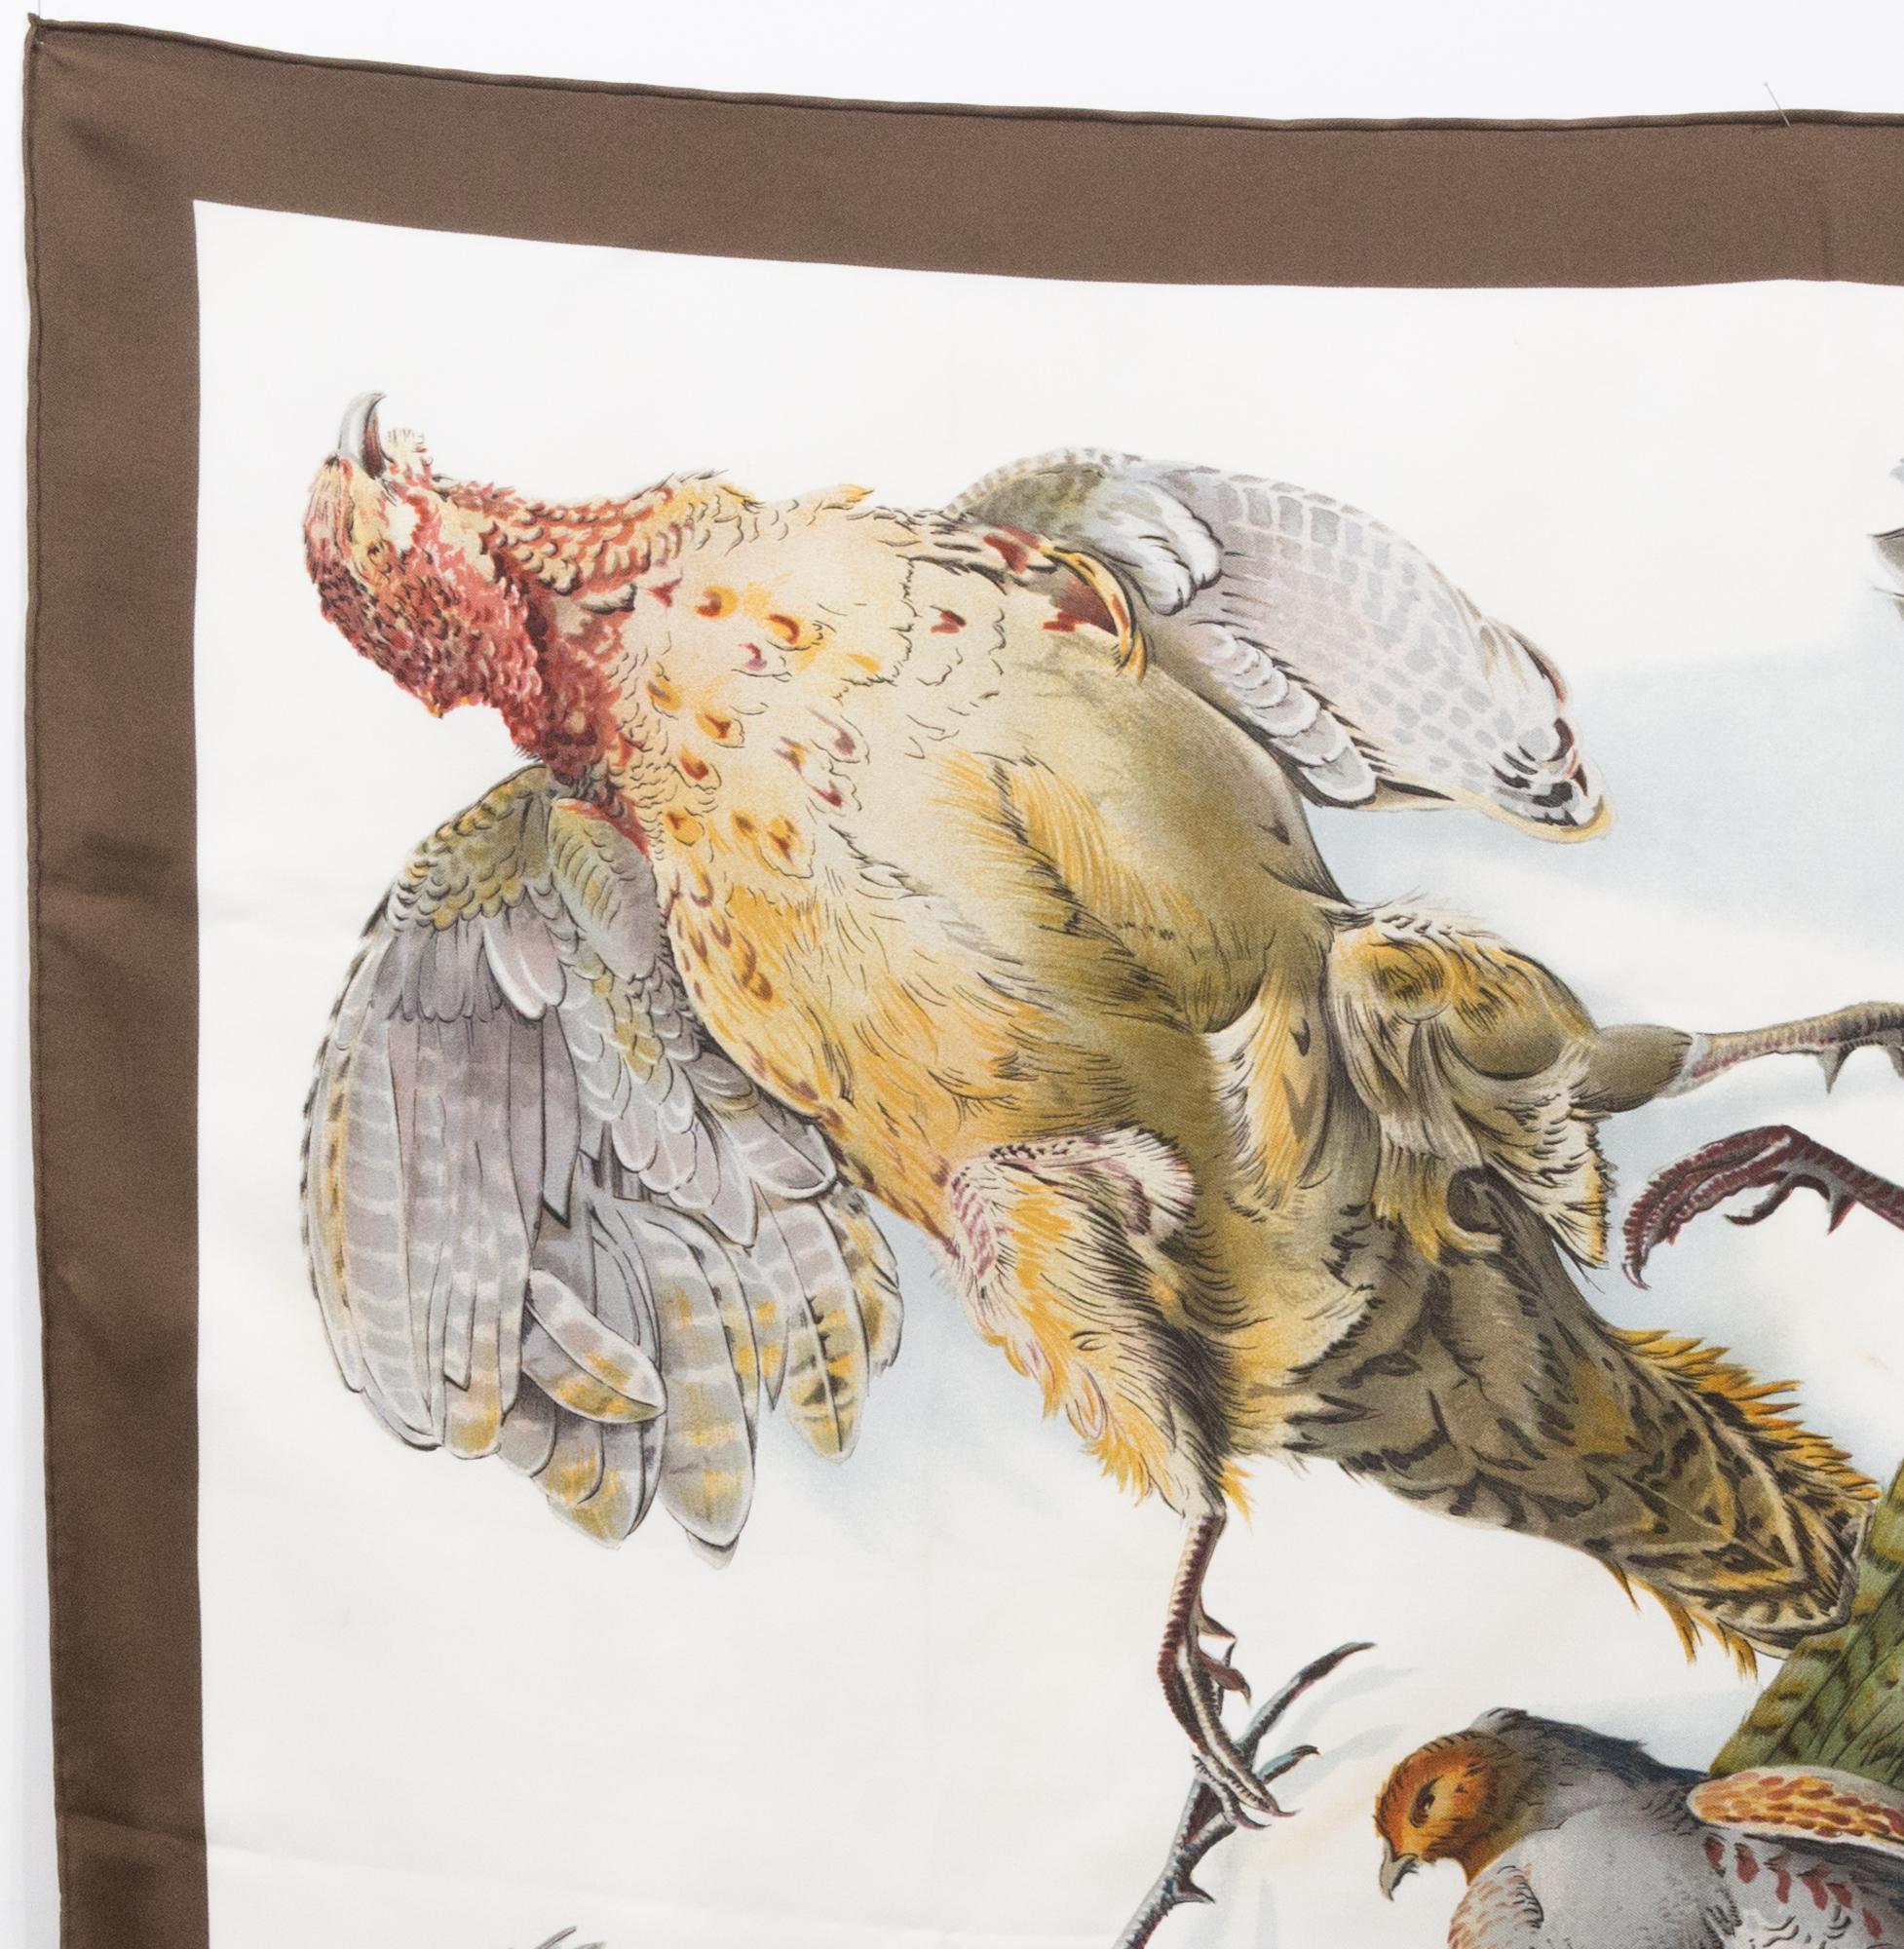 Hermès silk scarf Belle Chasse by M de Linares featuring a brown border, a Hermès signature. 
First edition: 1958
In good vintage condition. Made in France.
35,4in. (90cm)  X 35,4in. (90cm)
We guarantee you will receive this  iconic item as